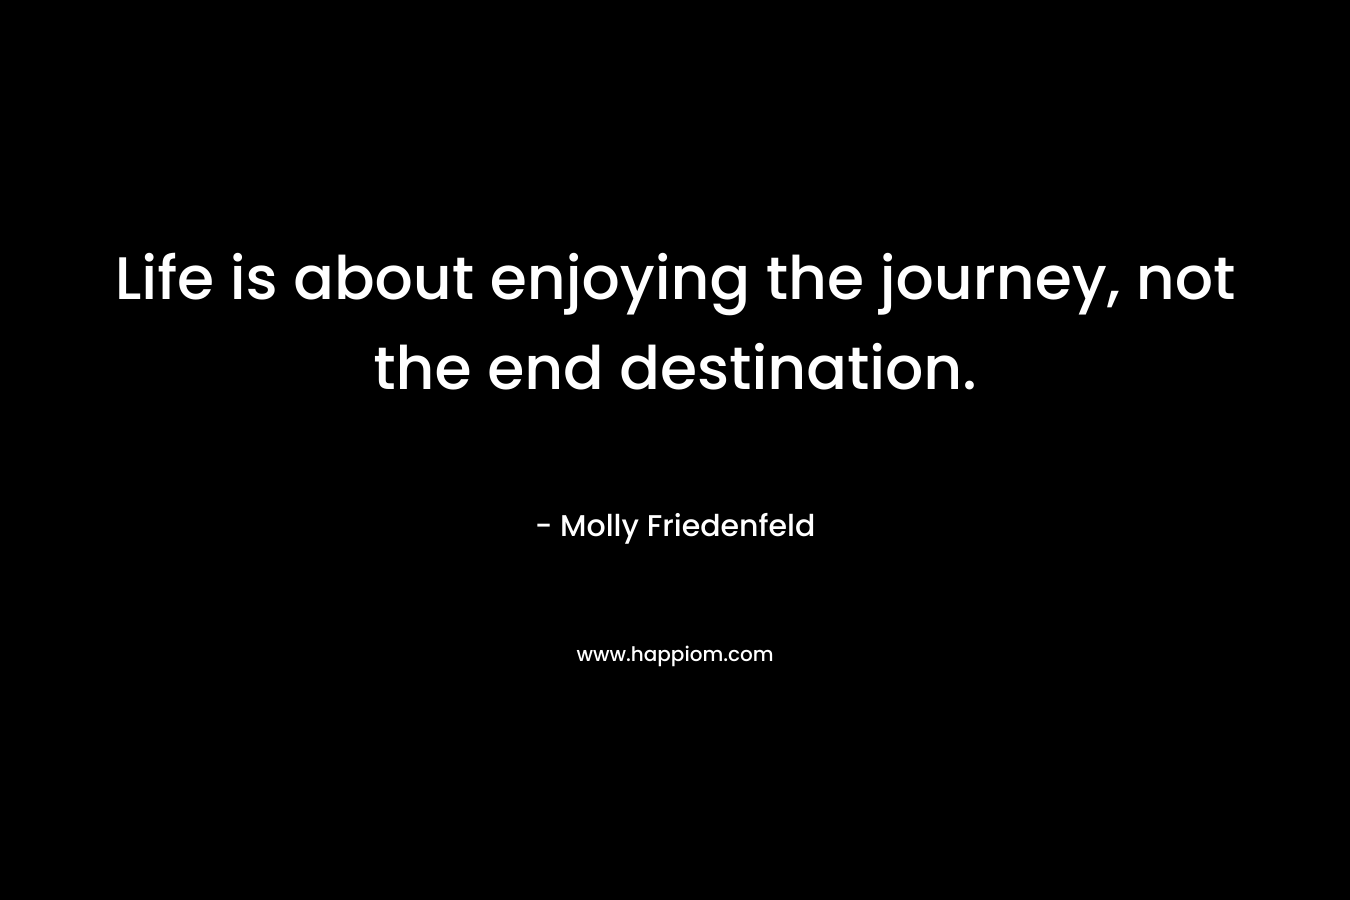 Life is about enjoying the journey, not the end destination.